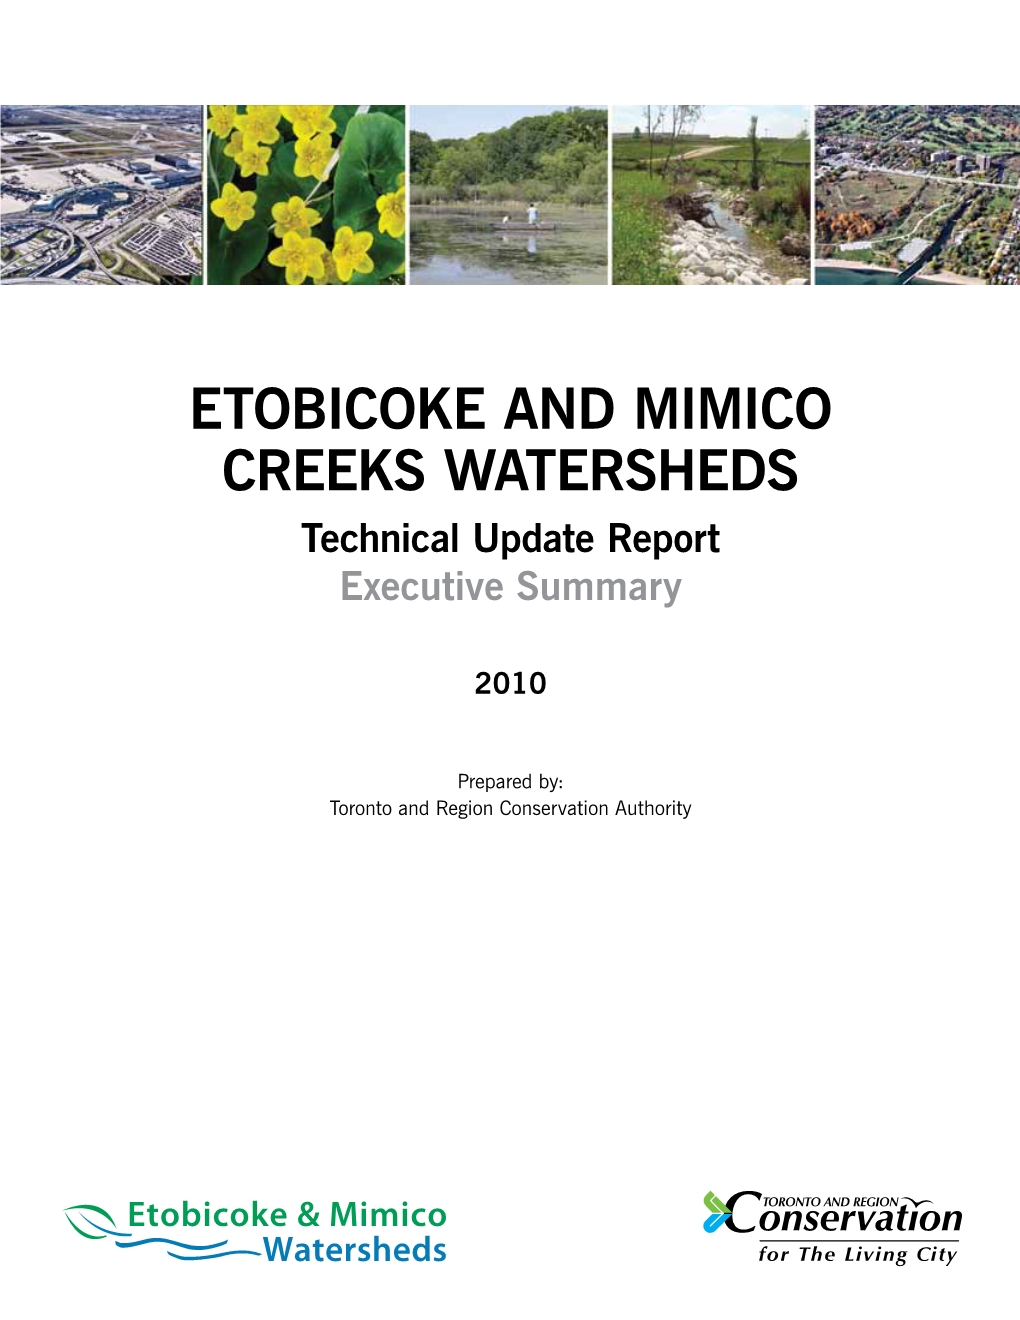 ETOBICOKE and MIMICO CREEKS WATERSHEDS Technical Update Report Executive Summary